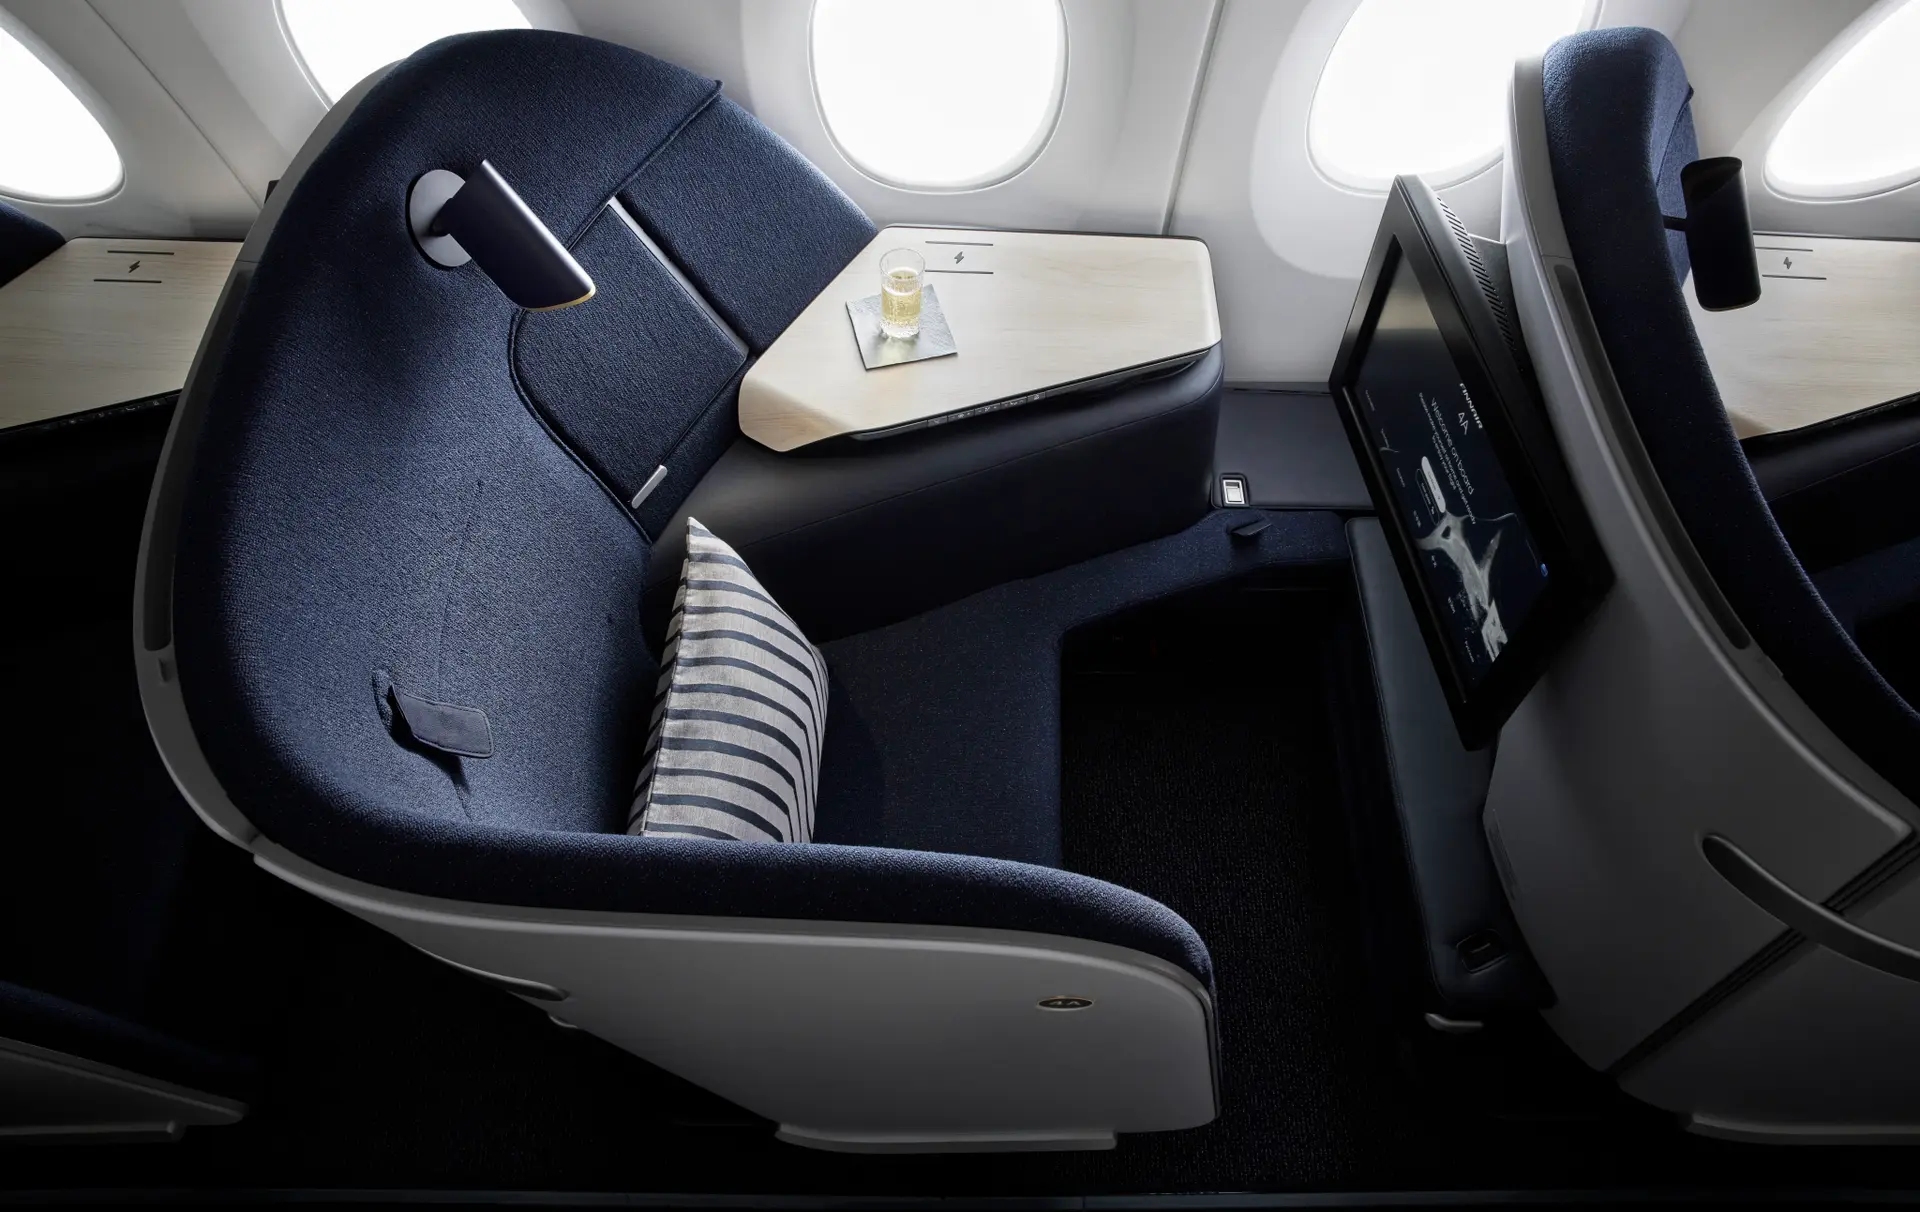 Airline review Cabin & Seat - Finnair - 1